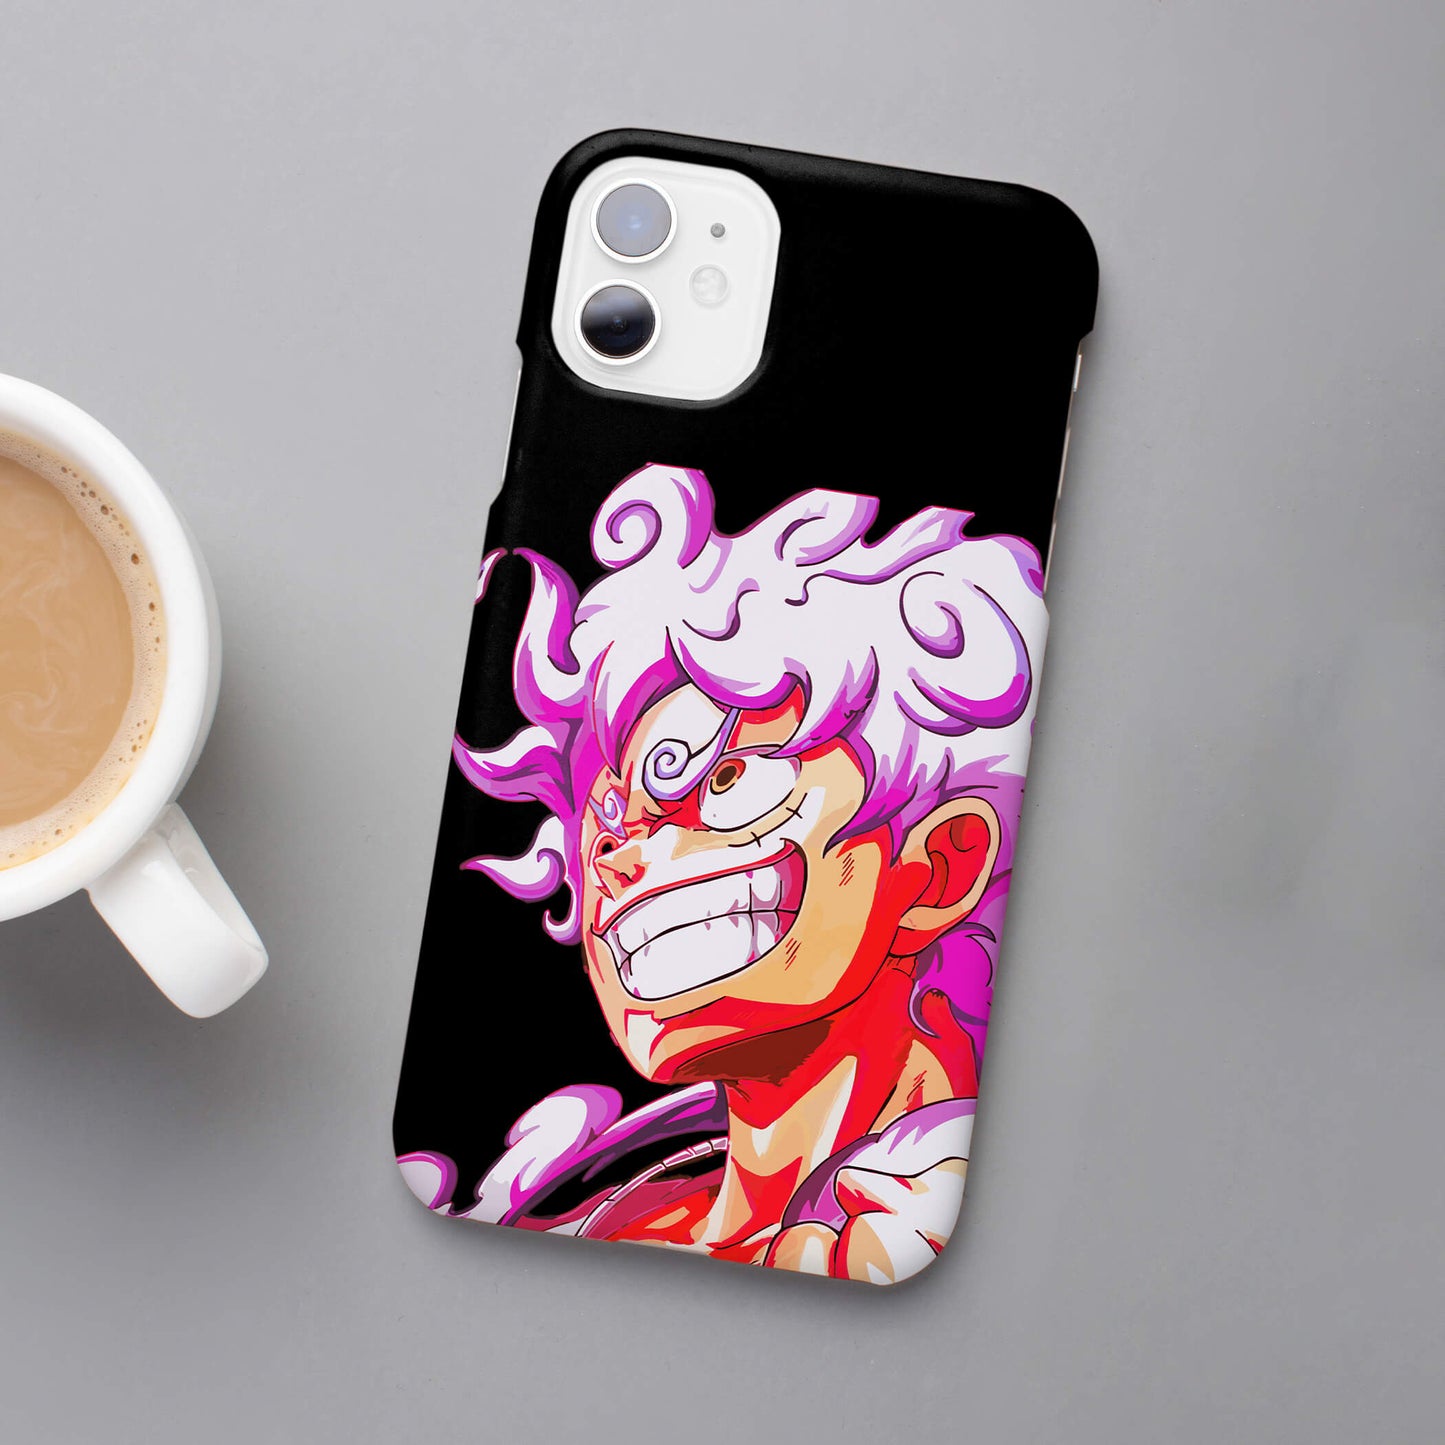 Luffy Gear 5 One Piece Cover